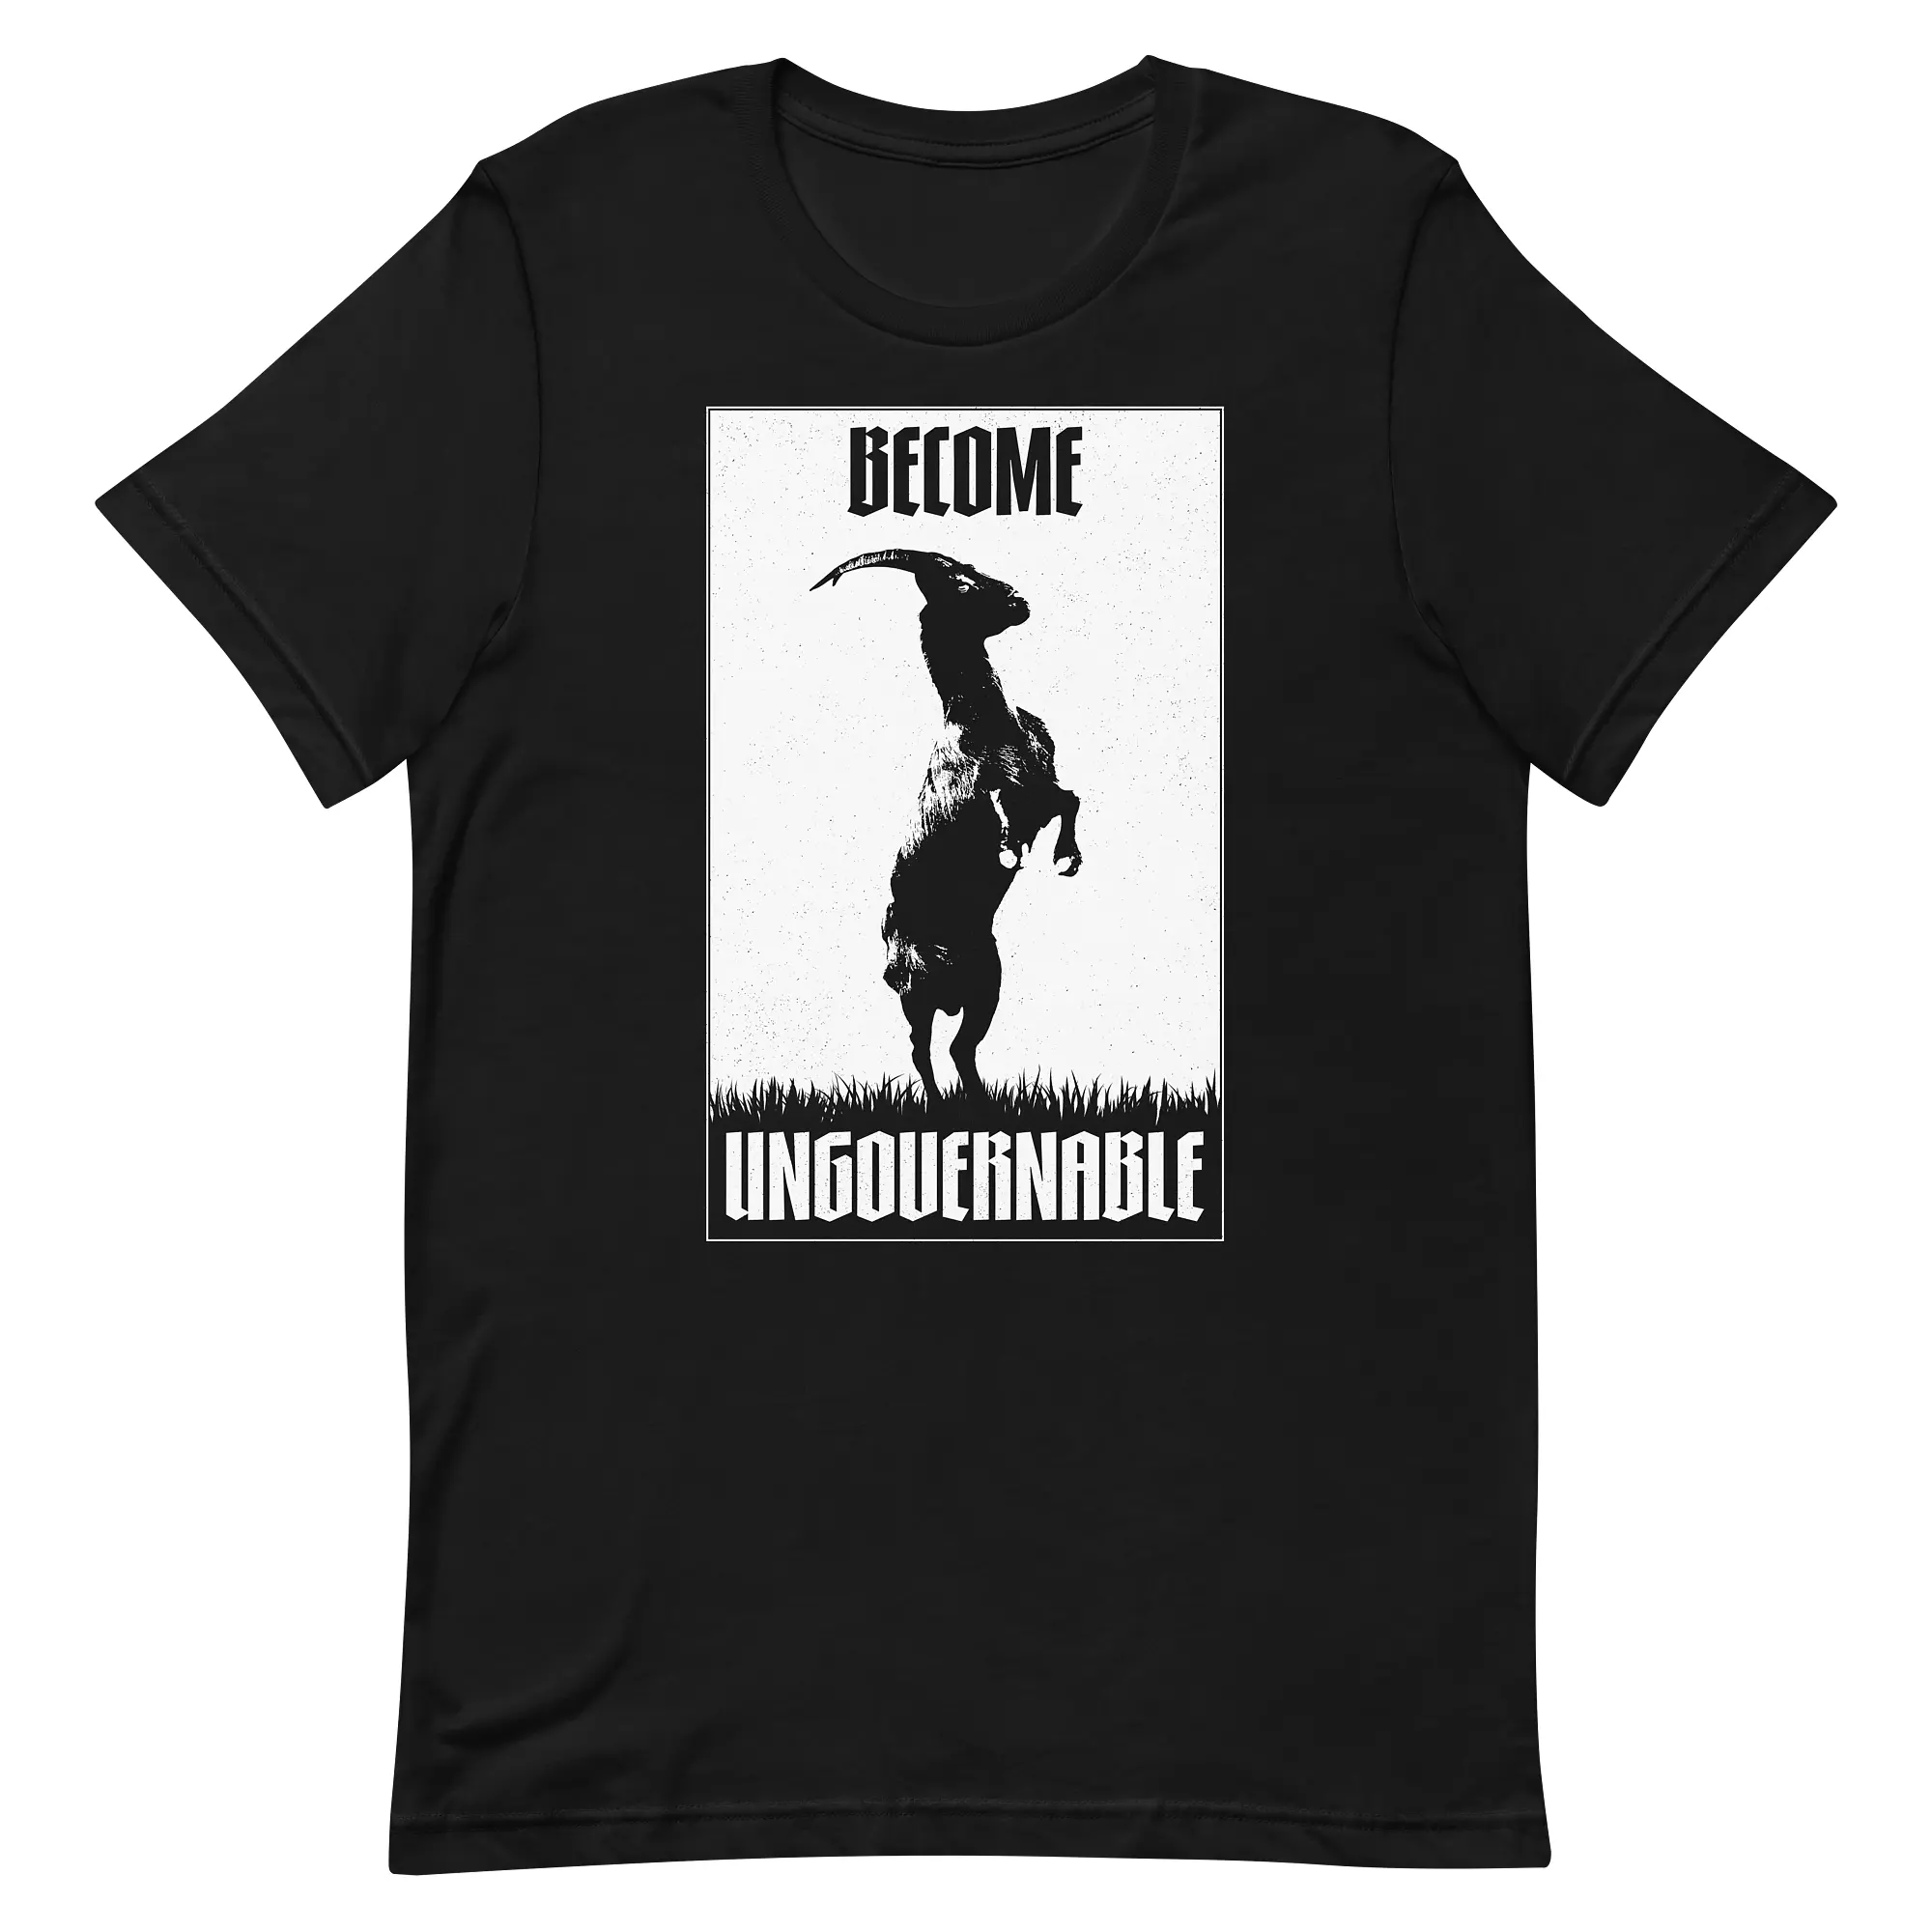 “Become Ungovernable” standing goat b&w tee